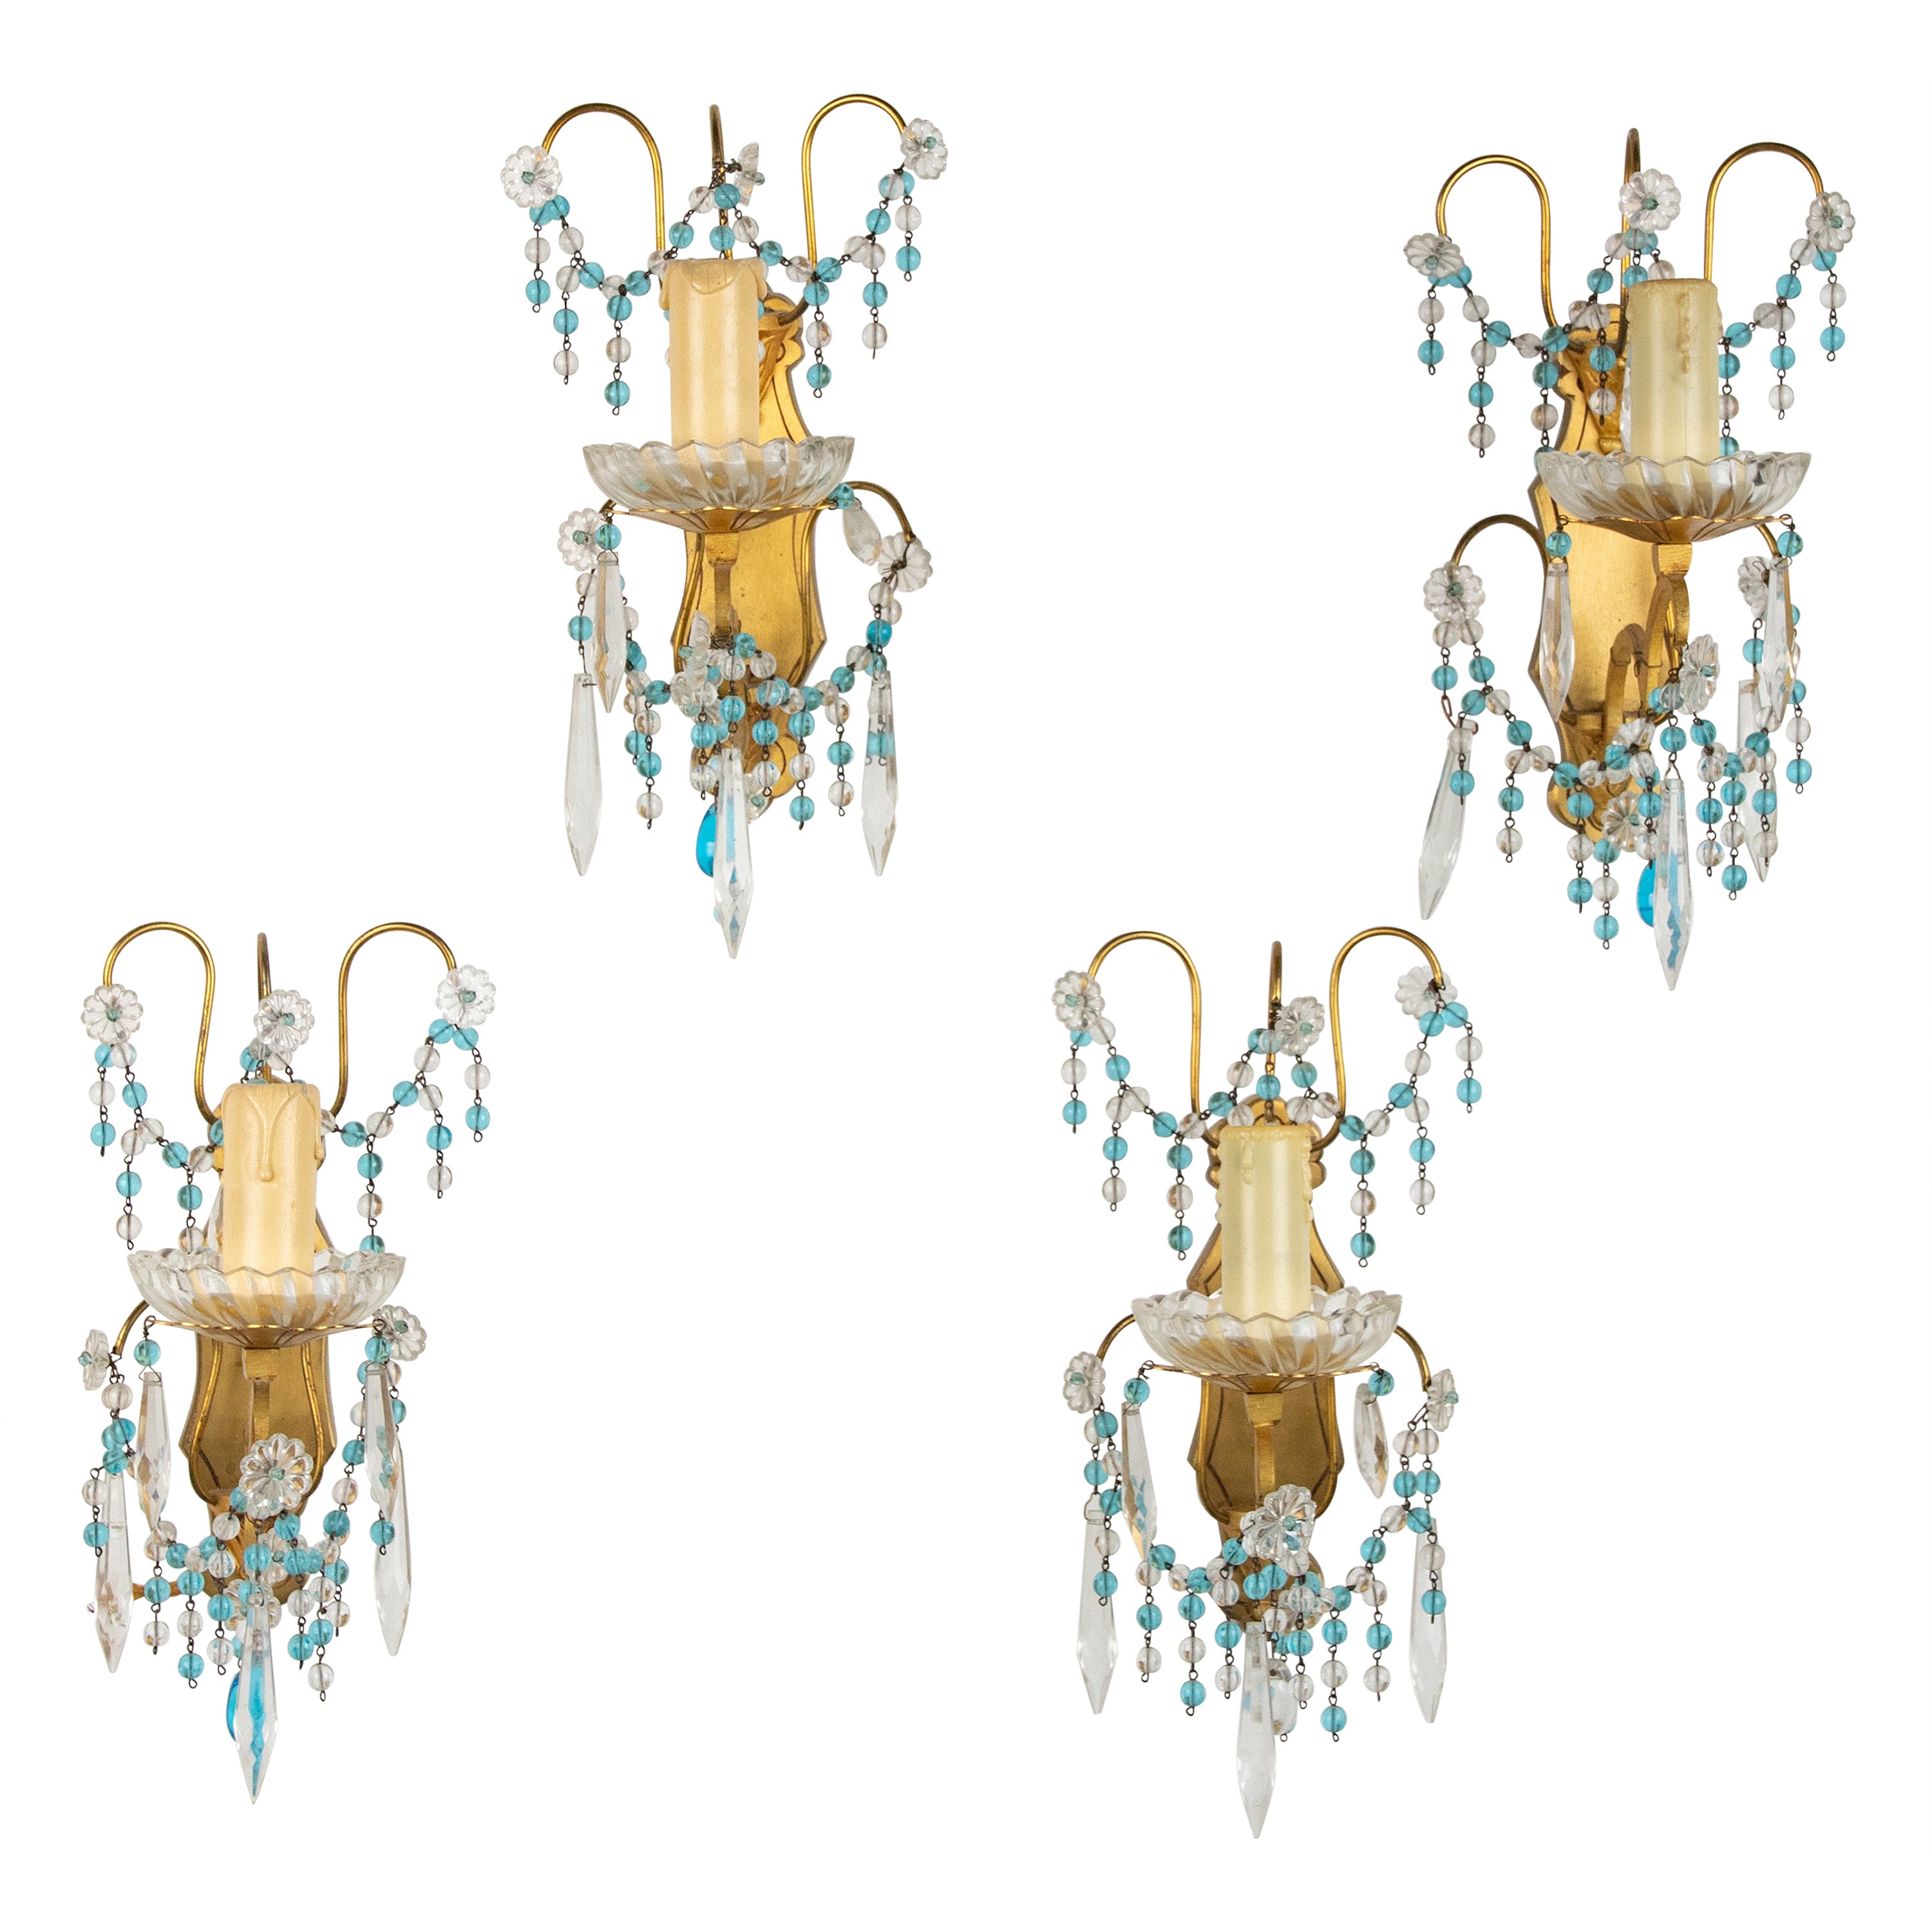 Early 20th Century, Wall Lights / Sconces Blue Glass Drops For Sale